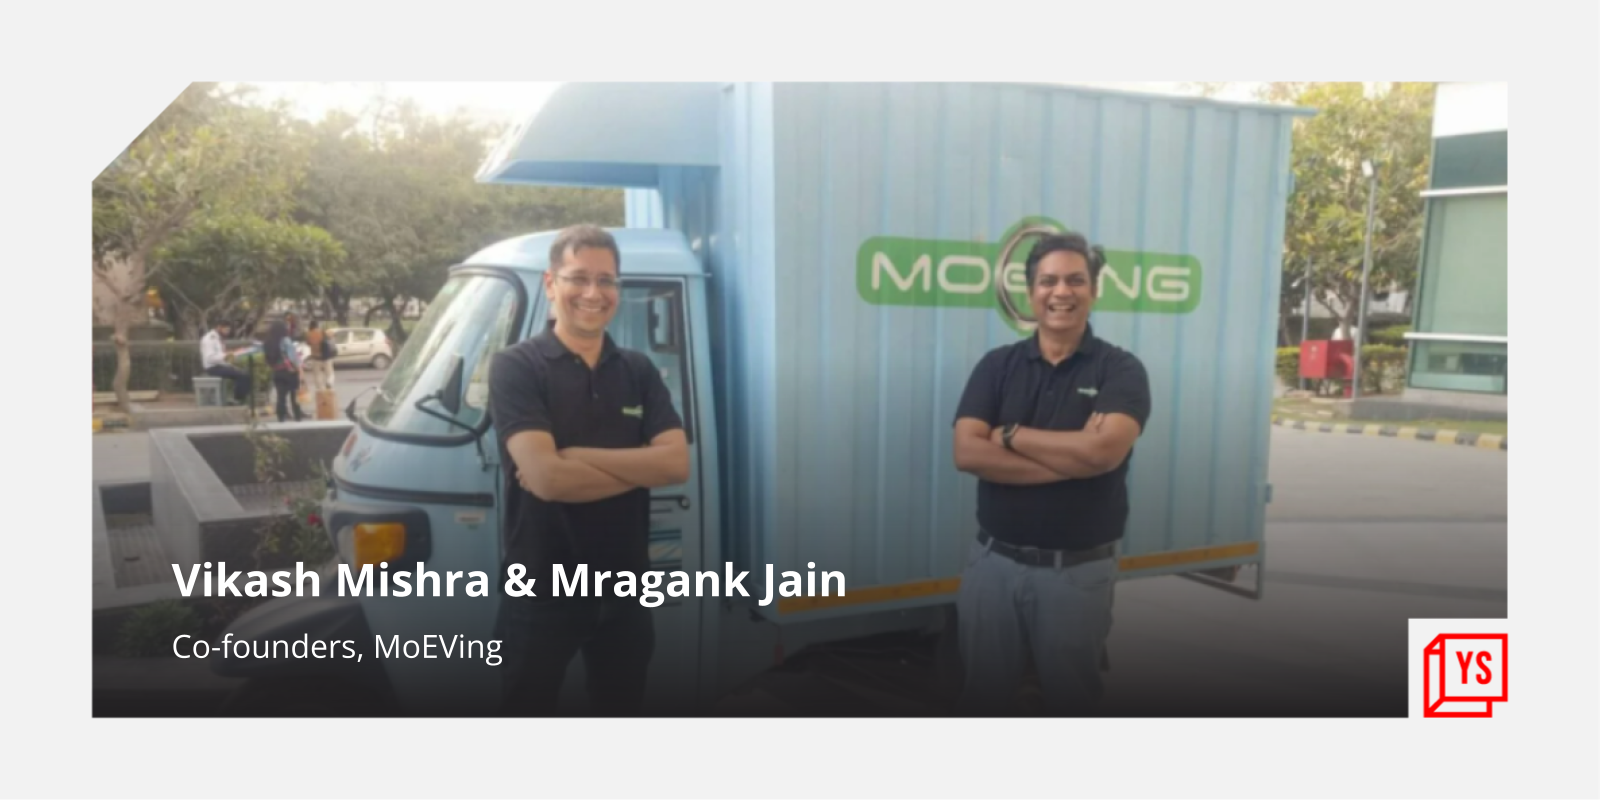 [Funding alert] Electric mobility startup MoEVing raises an additional $5M as part of its seed round